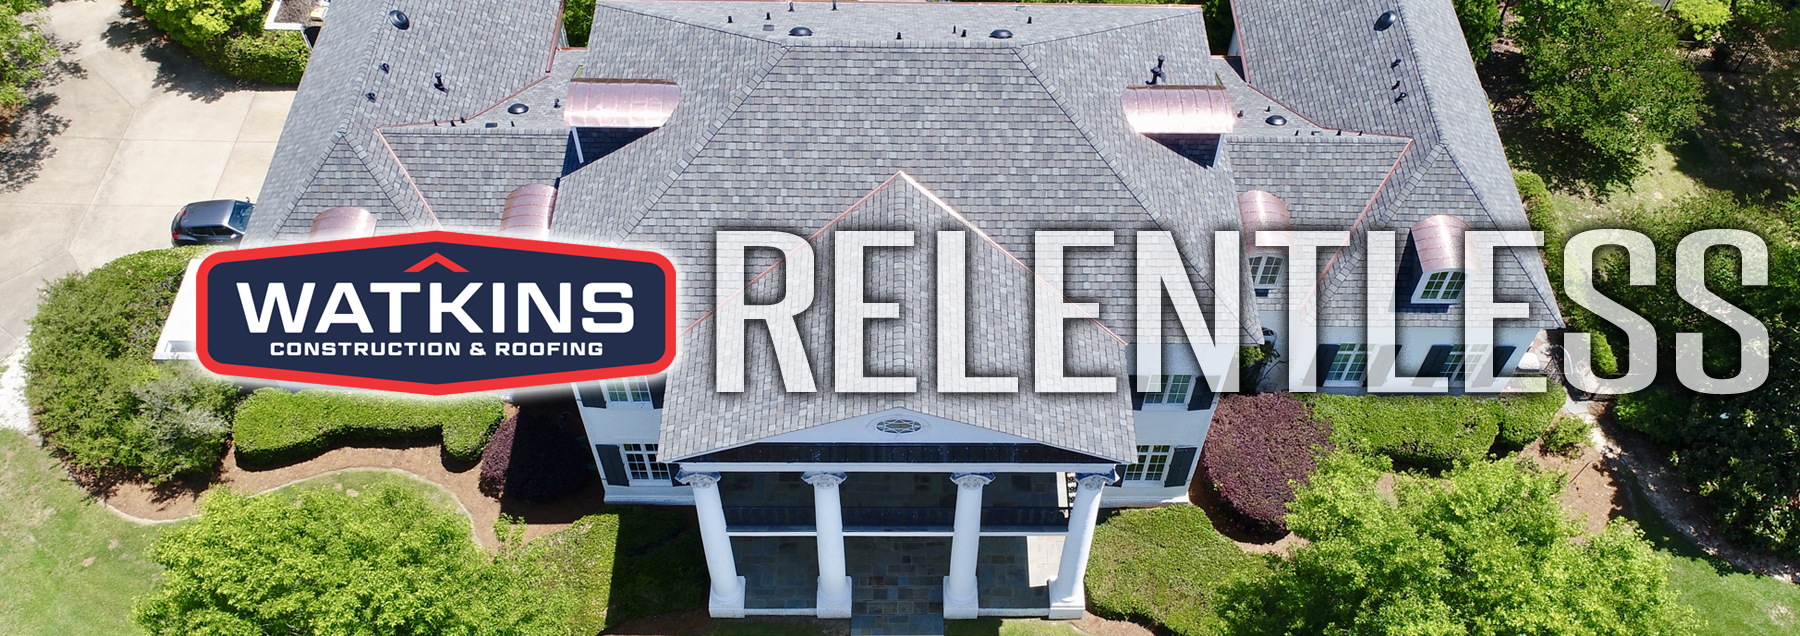 Watkins Construction & Roofing reviews | 1072 High St. - Jackson MS